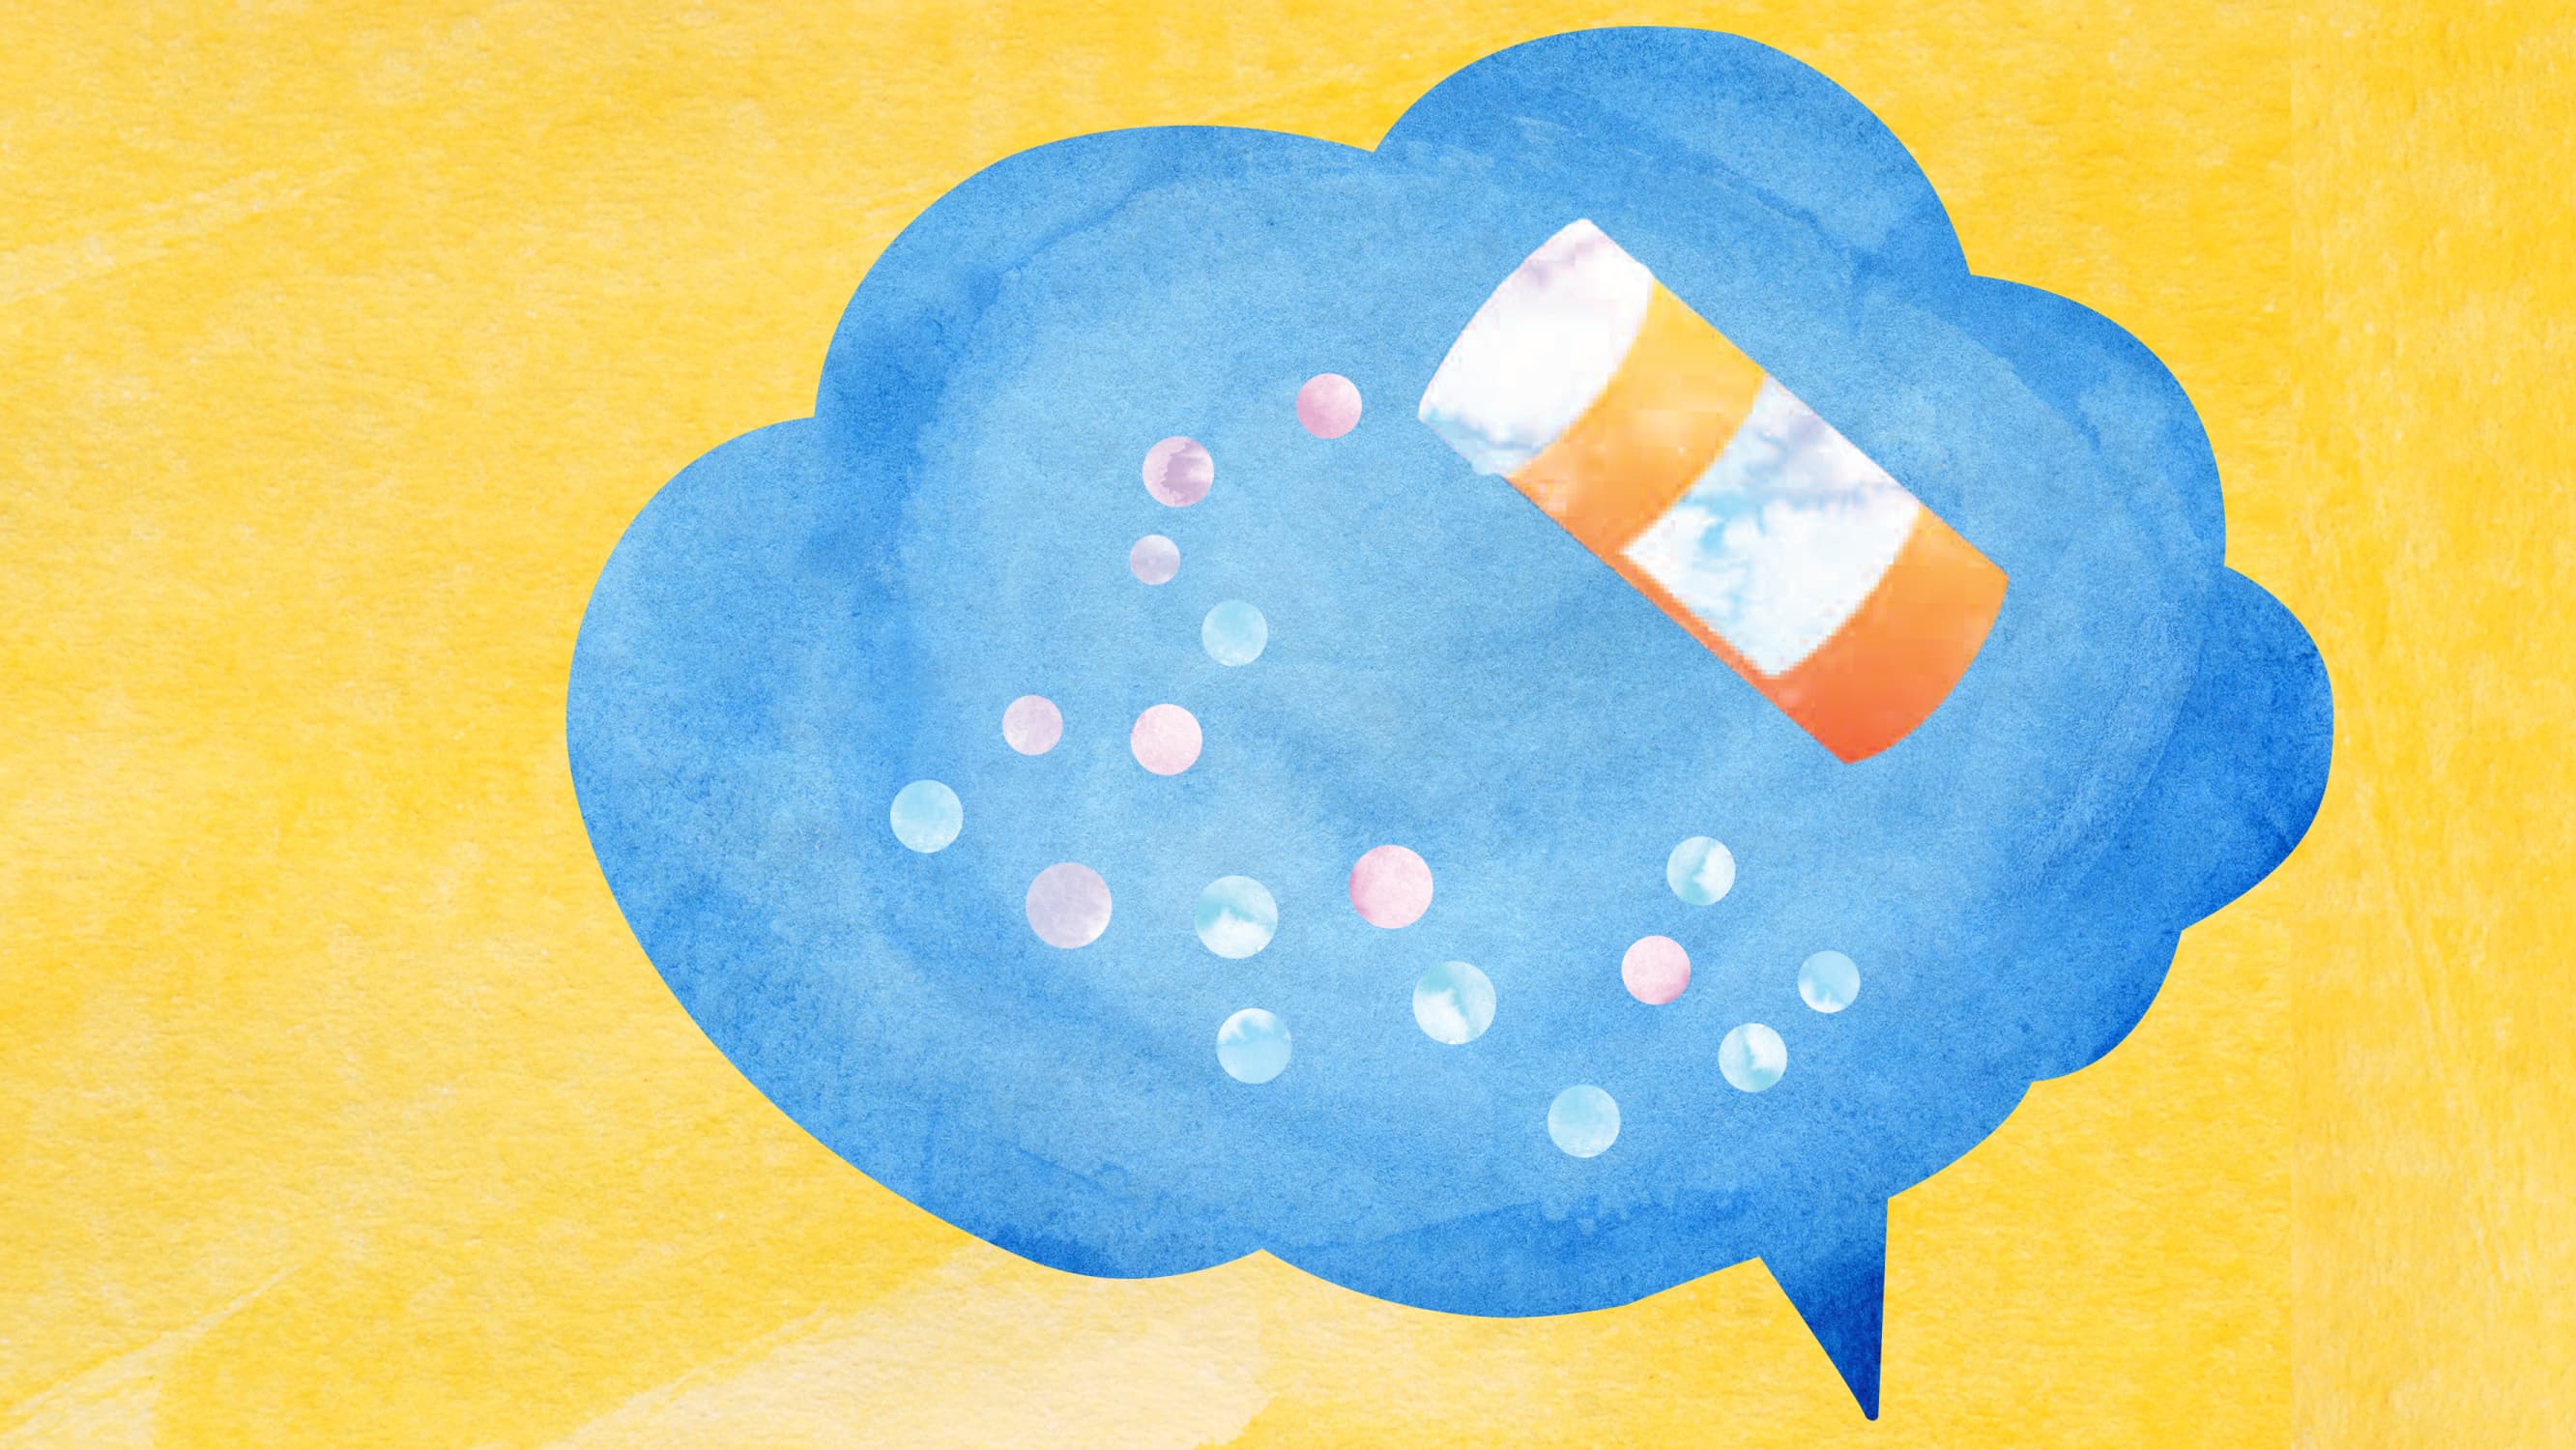 An illustration of a blue speech bubble is shown with pills and a prescription bottle inside.